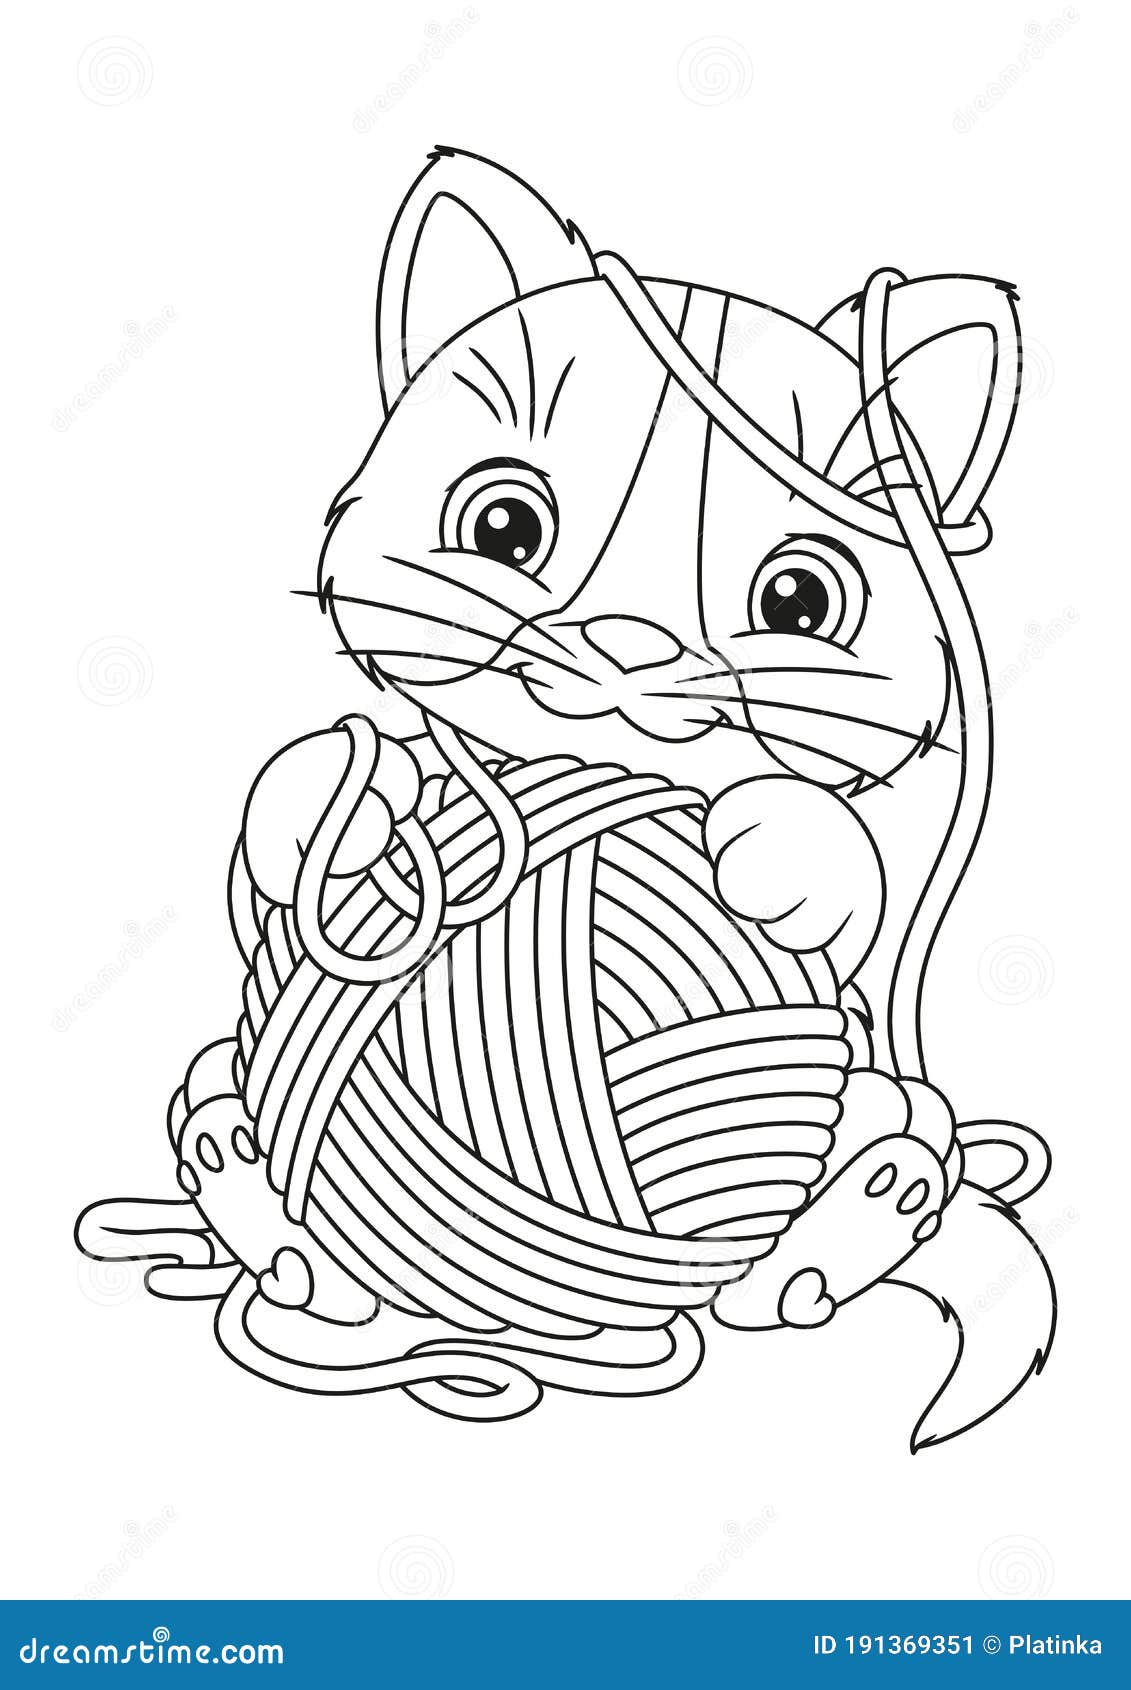 Download Kitten Yarn Ball Coloring Page Stock Illustrations 31 Kitten Yarn Ball Coloring Page Stock Illustrations Vectors Clipart Dreamstime